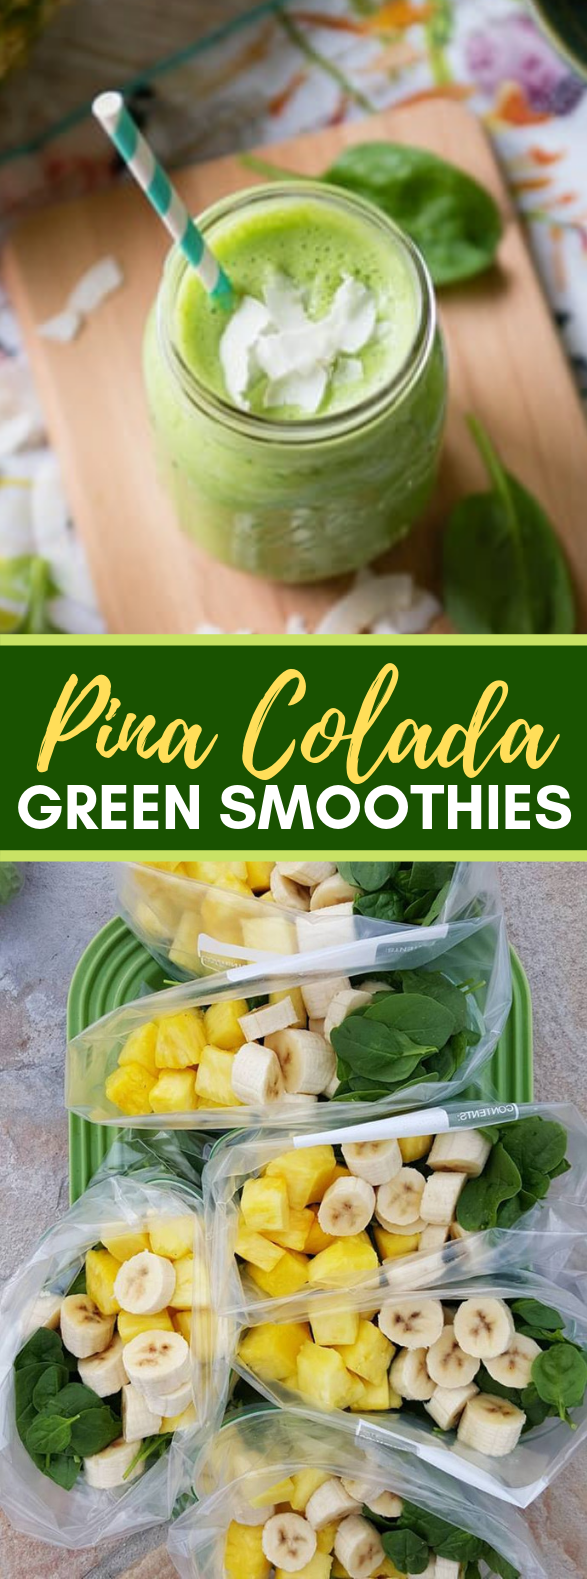 Pina-Colada Green Smoothies #drinks #healthy